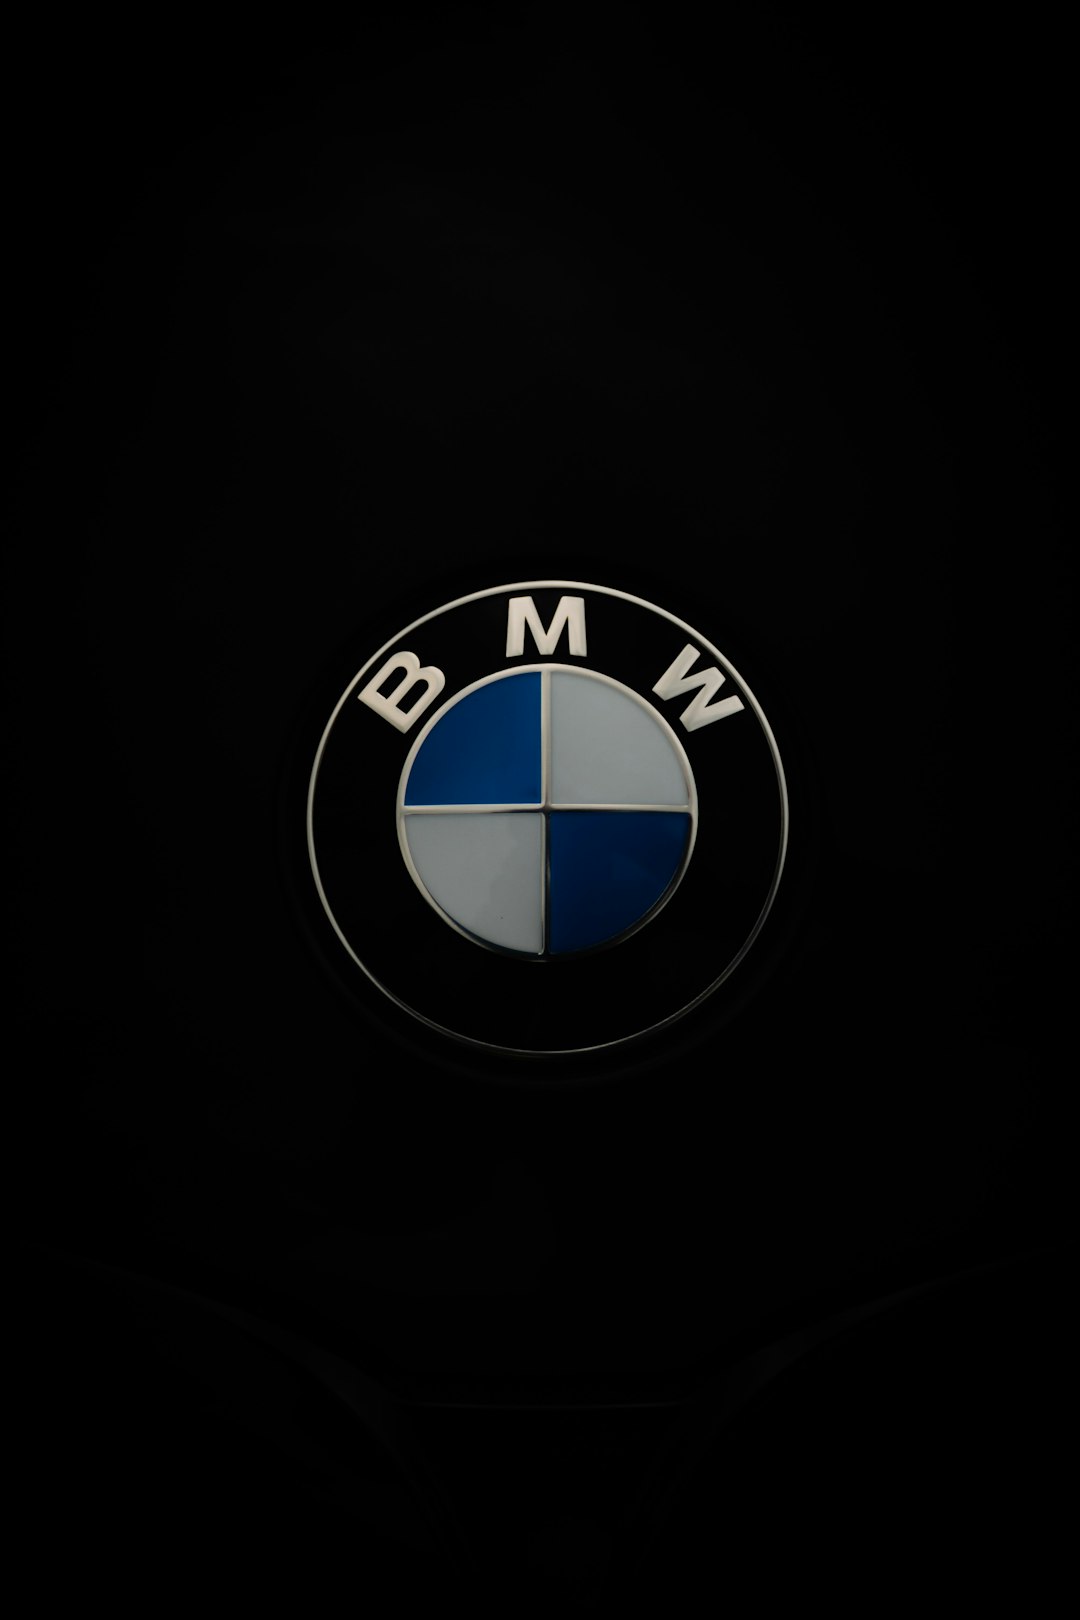 The BMW 3 Series is a stylish and sporty luxury sedan with a reputation for performance and precision.